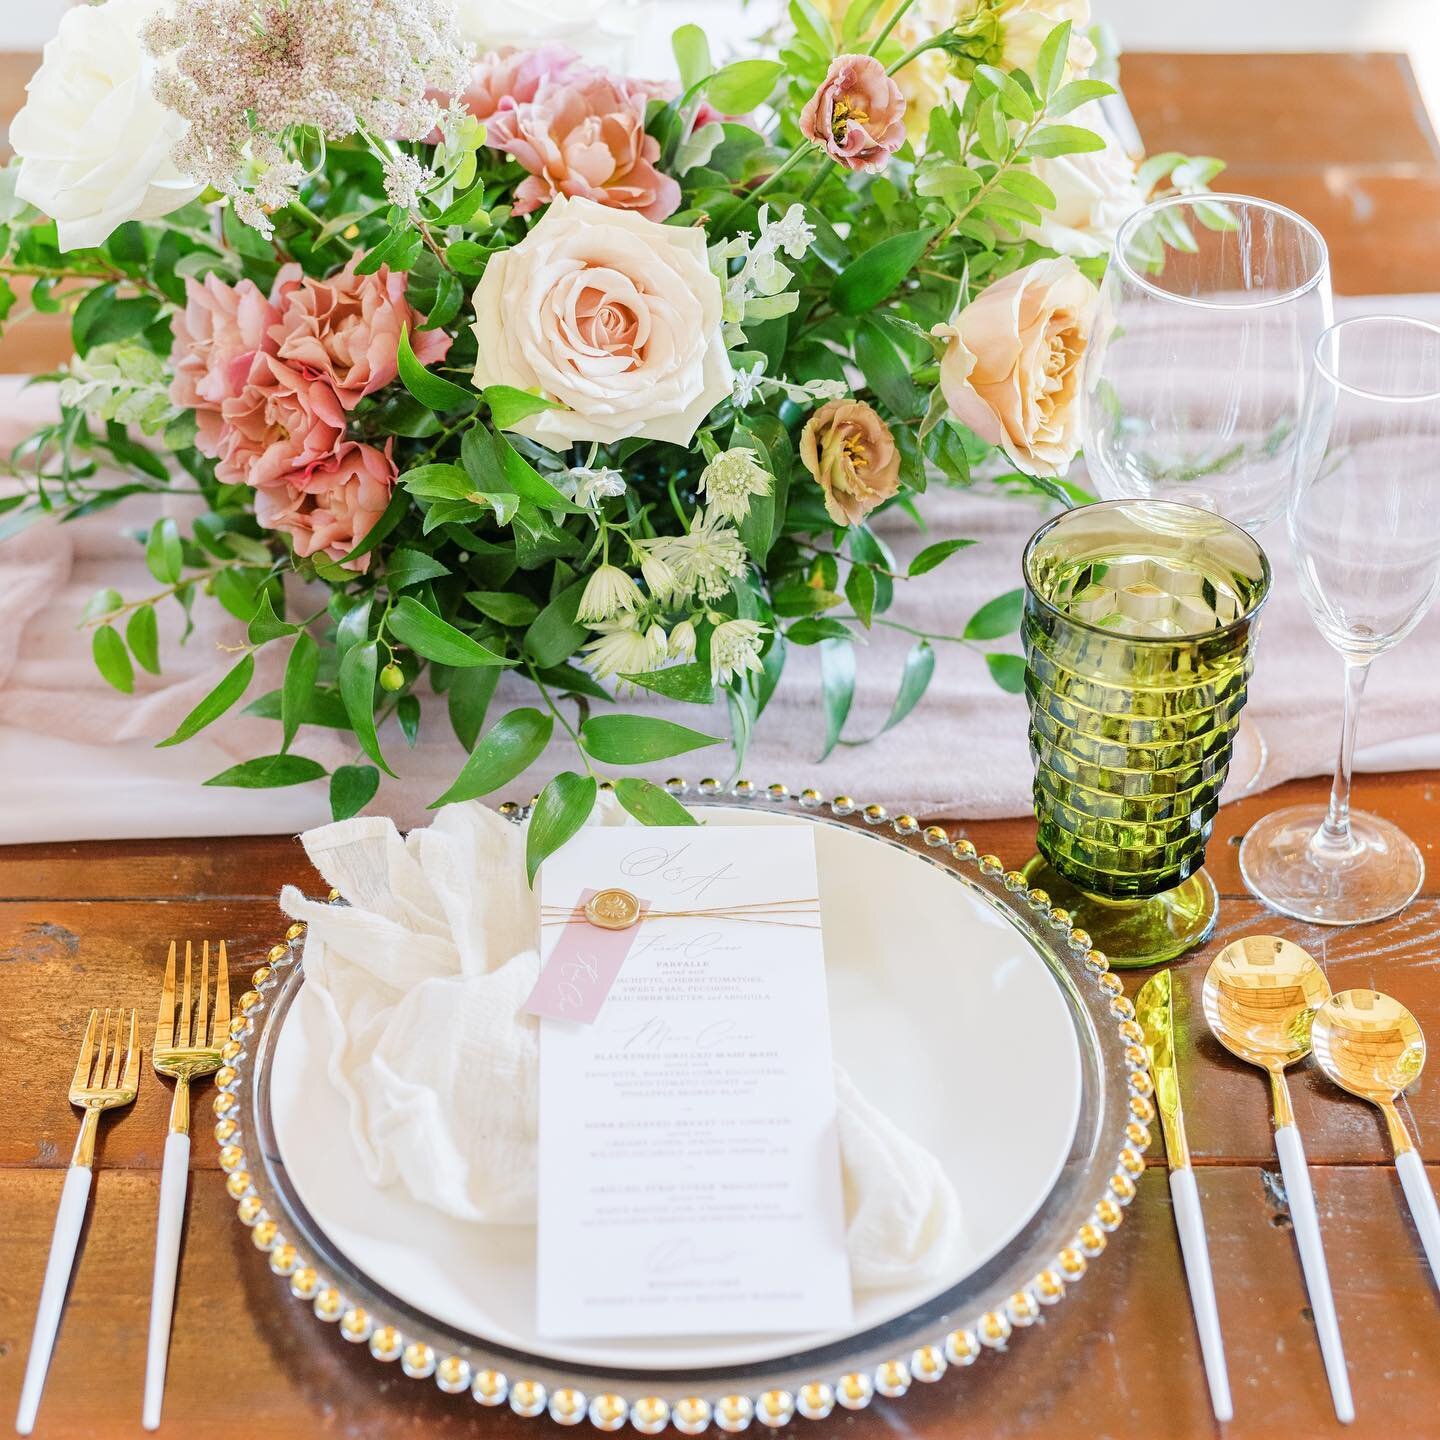 It&rsquo;s all in the details to create the perfect tablescape. 

Things to consider when putting together your wedding tables:
Unique silverware
Textured charger
Flowing table runner
Custom stationary 
Antique cups
Colorful taper candles
And of cour